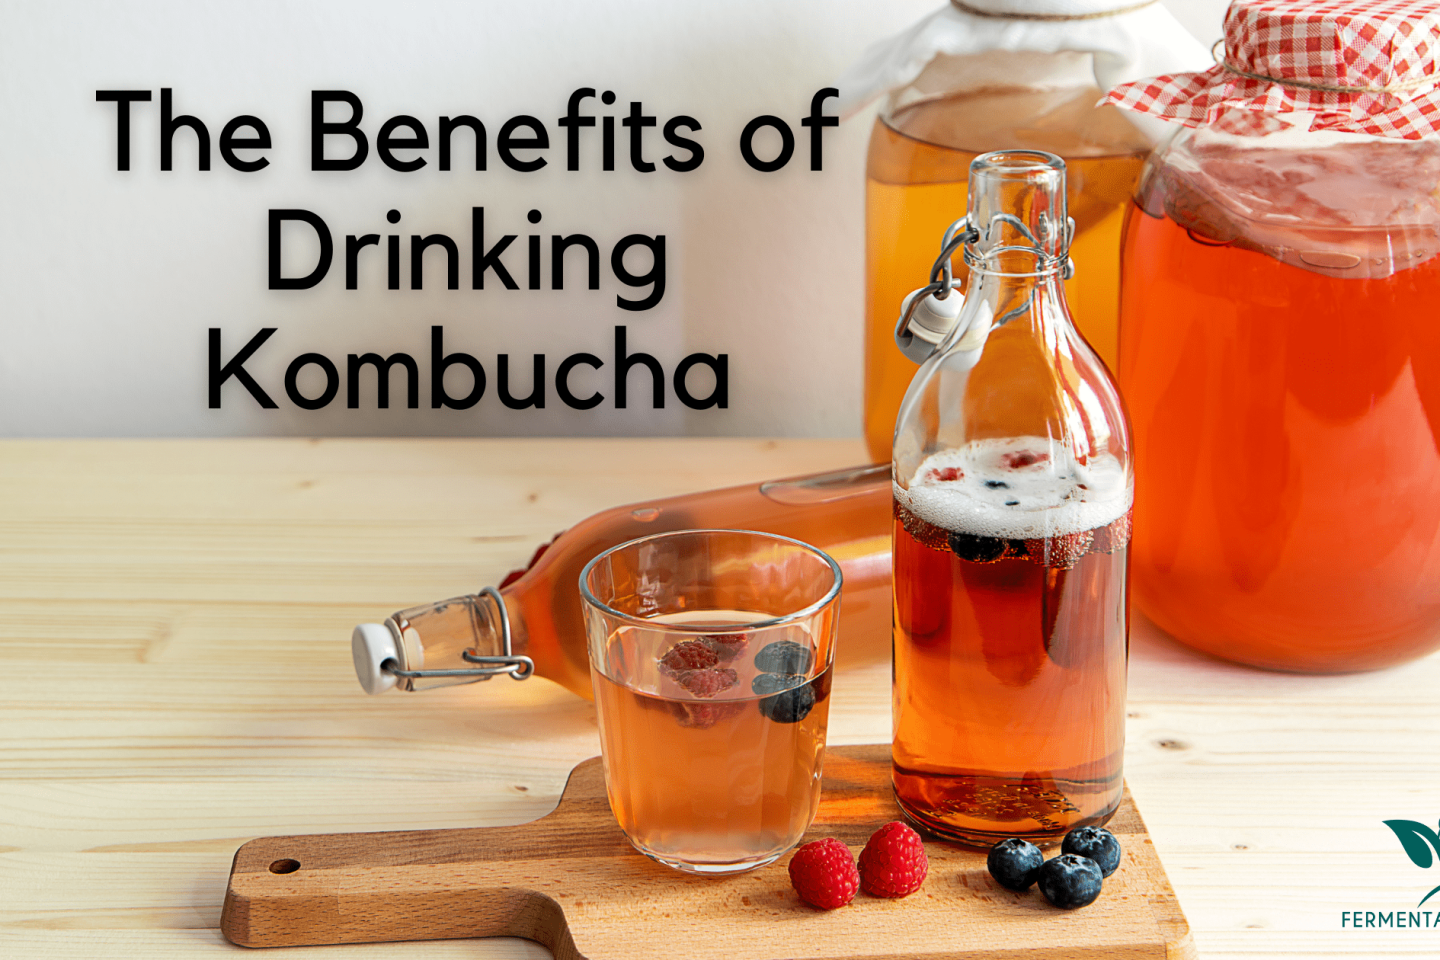 The Benefits of Drinking Kombucha and How to Make it at Home